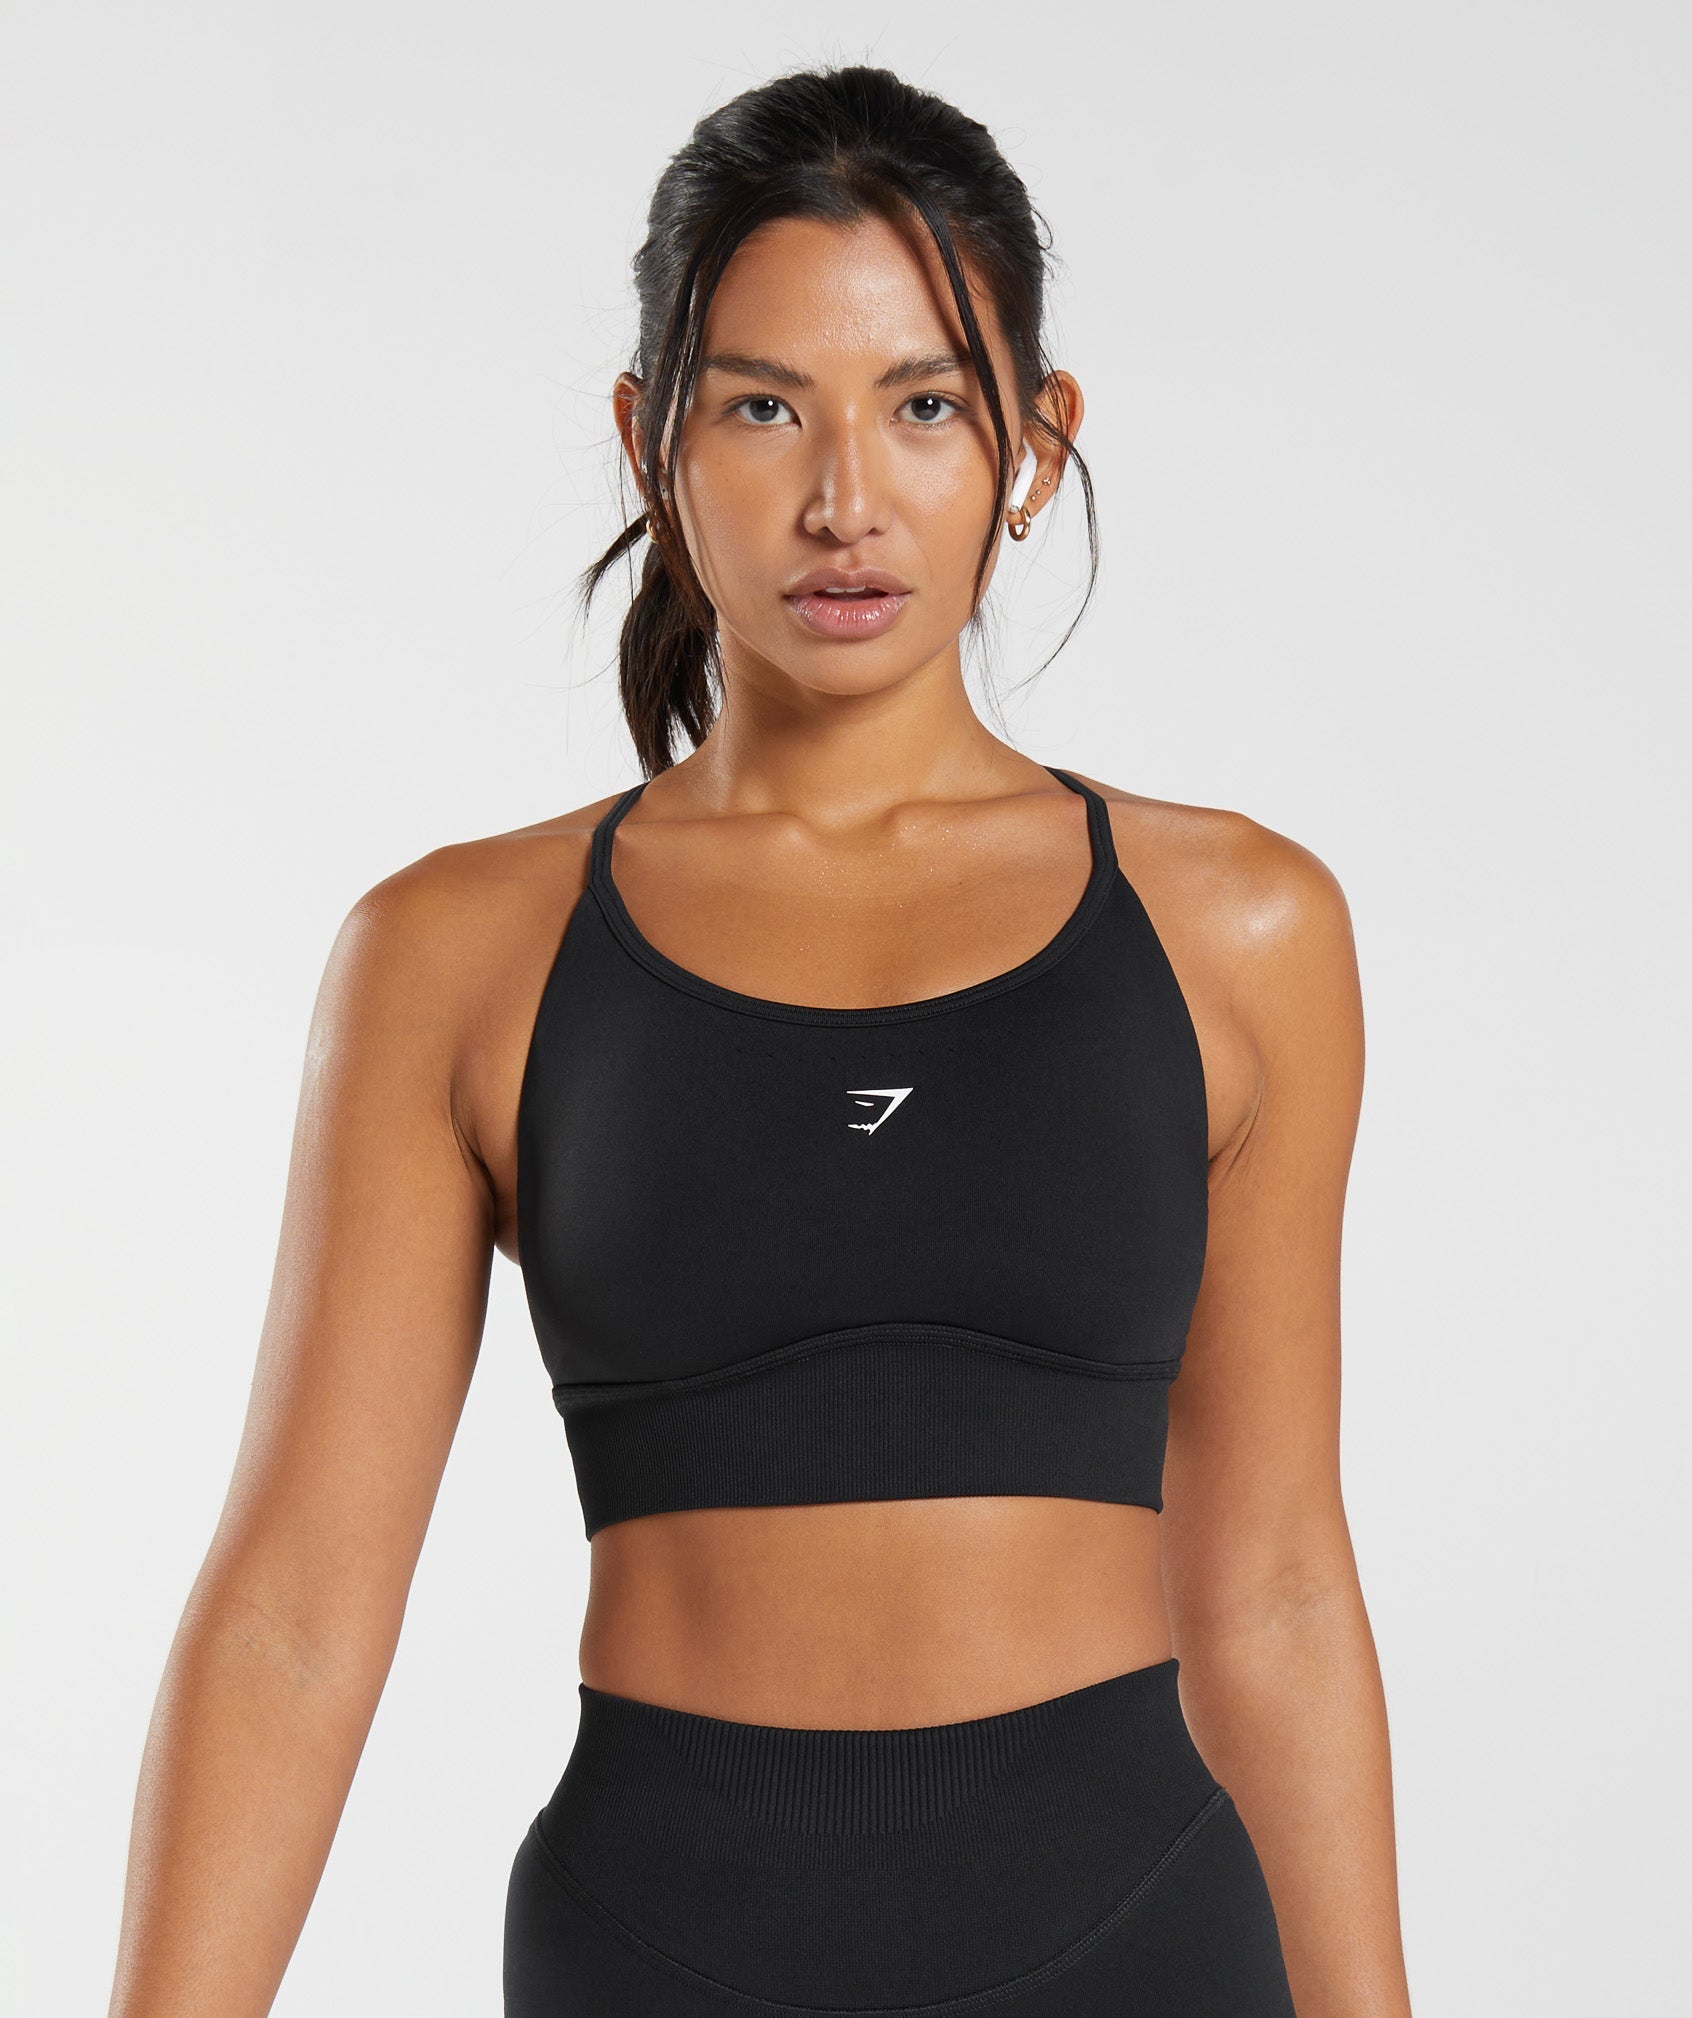 Stay Comfortable and Stylish with our Pro-Fit Seamless Sports Bra